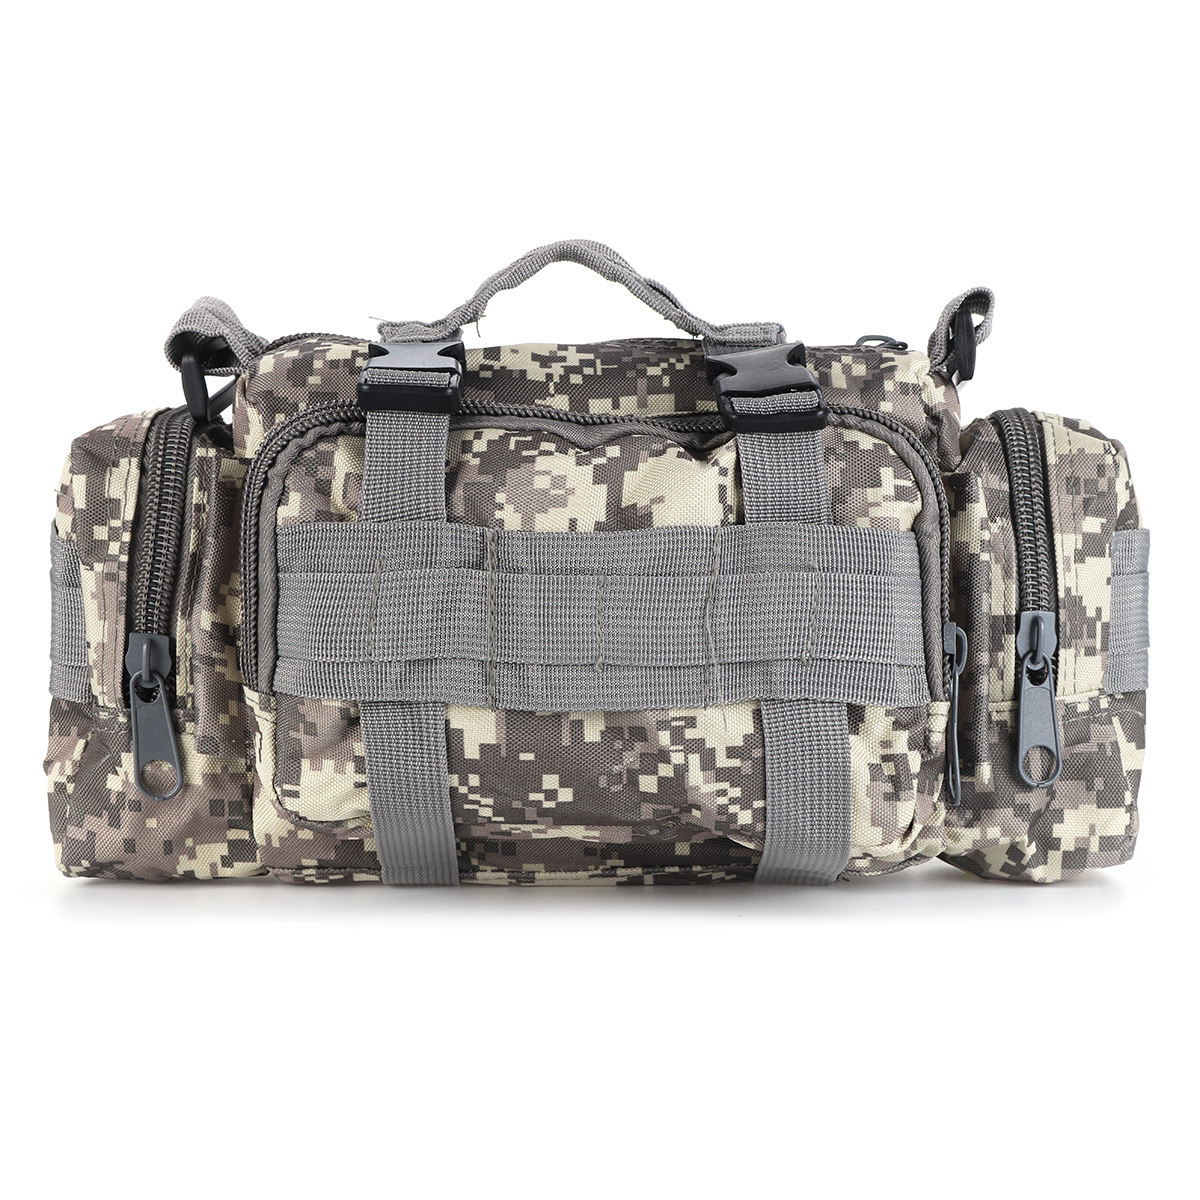 Multifunctional-Outdoor-Sports-Hiking-with-Zippers-Nylon-Oxford-Cloth-Tactical-Shoulder-Bag-Waist-Pa-1825563-10